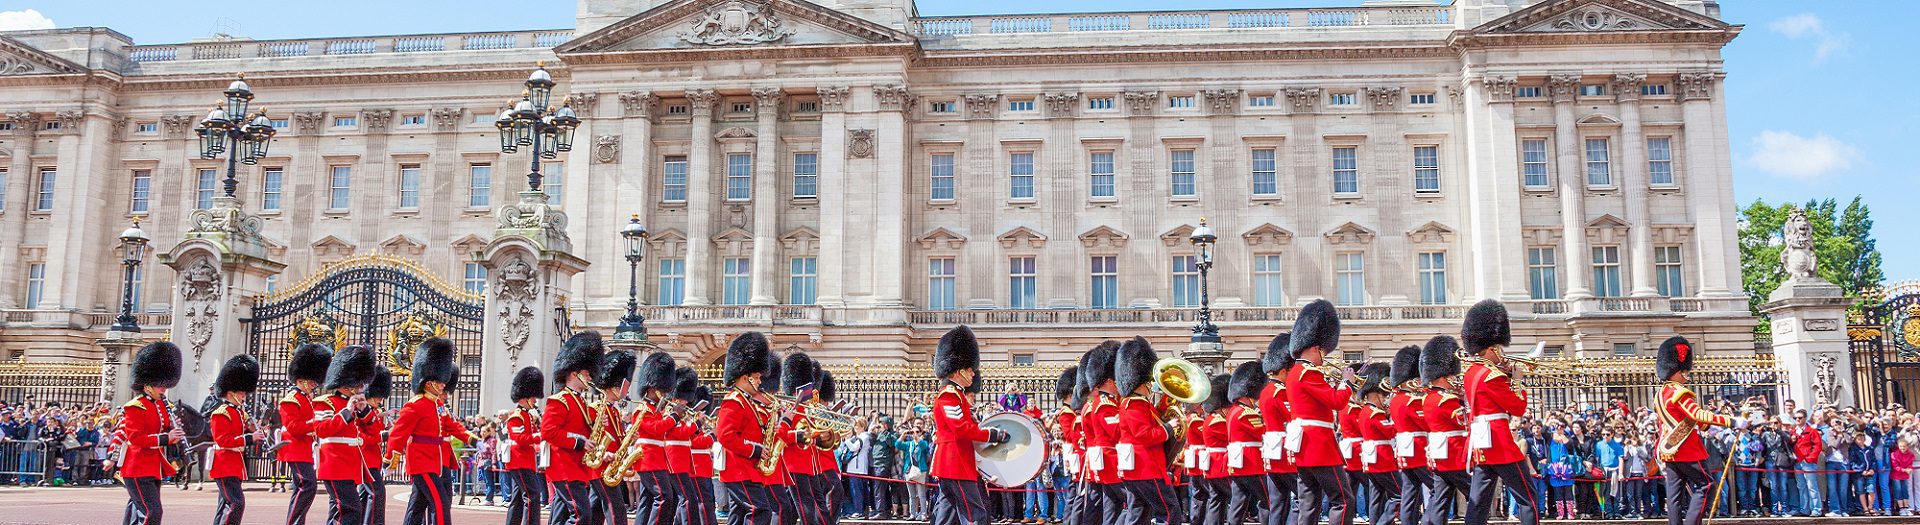 changing of the guard in front of  buckingham palace